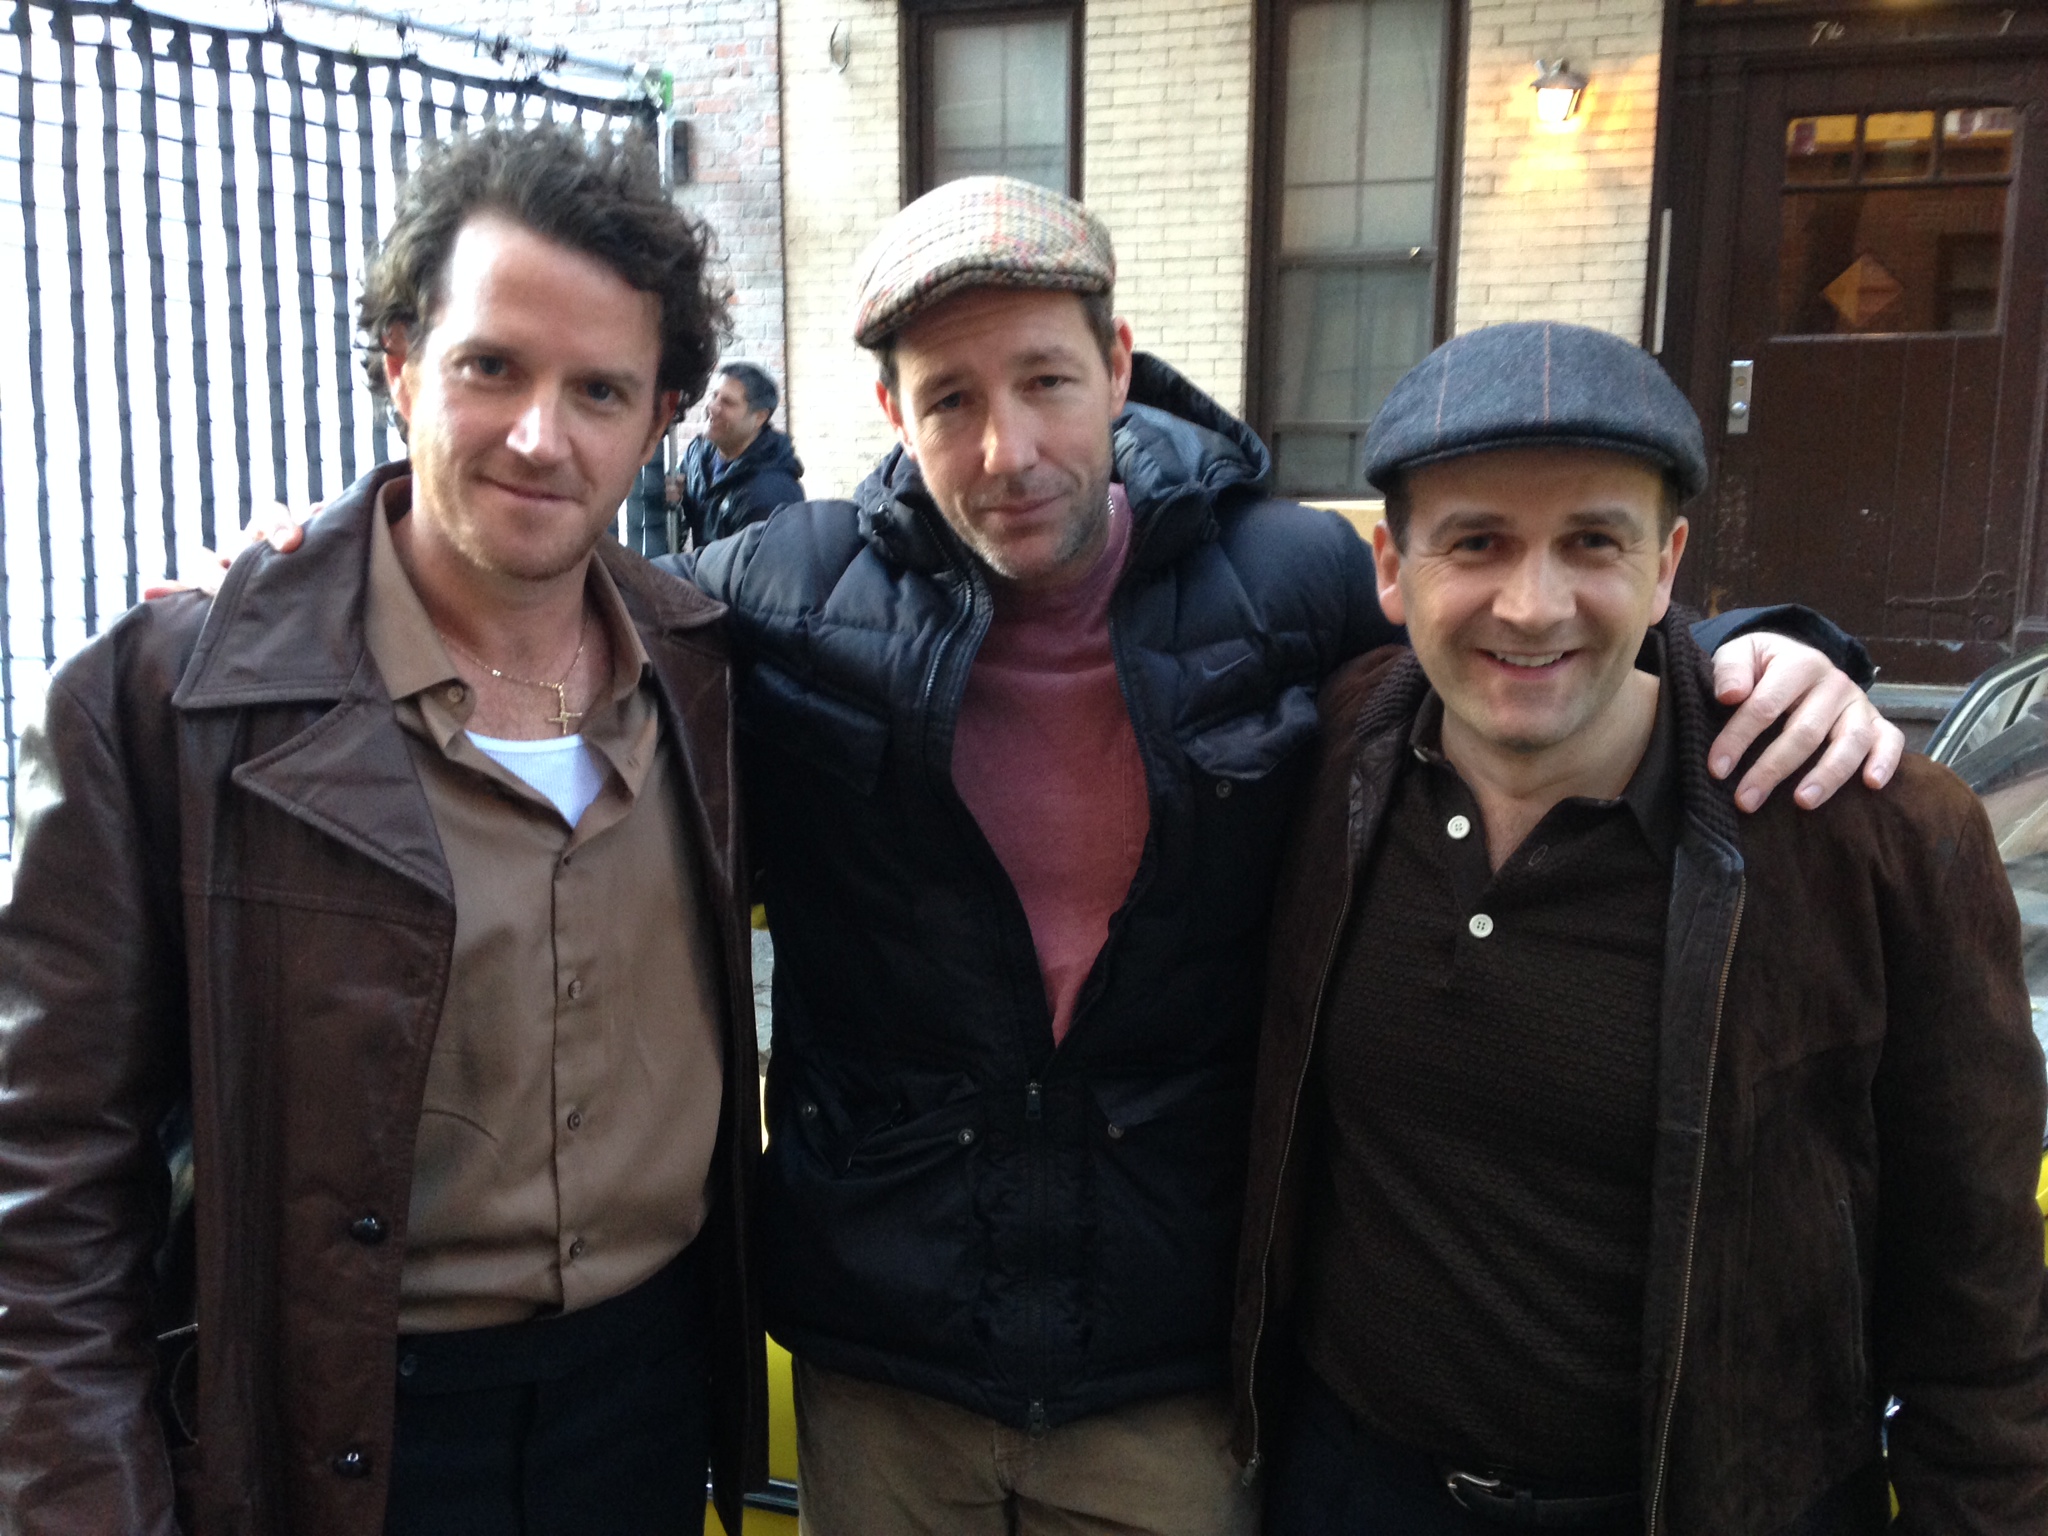 with Eddie Burns and Ciaran Byrne, outside 'Billy Rogers' walkup, w 12th street 